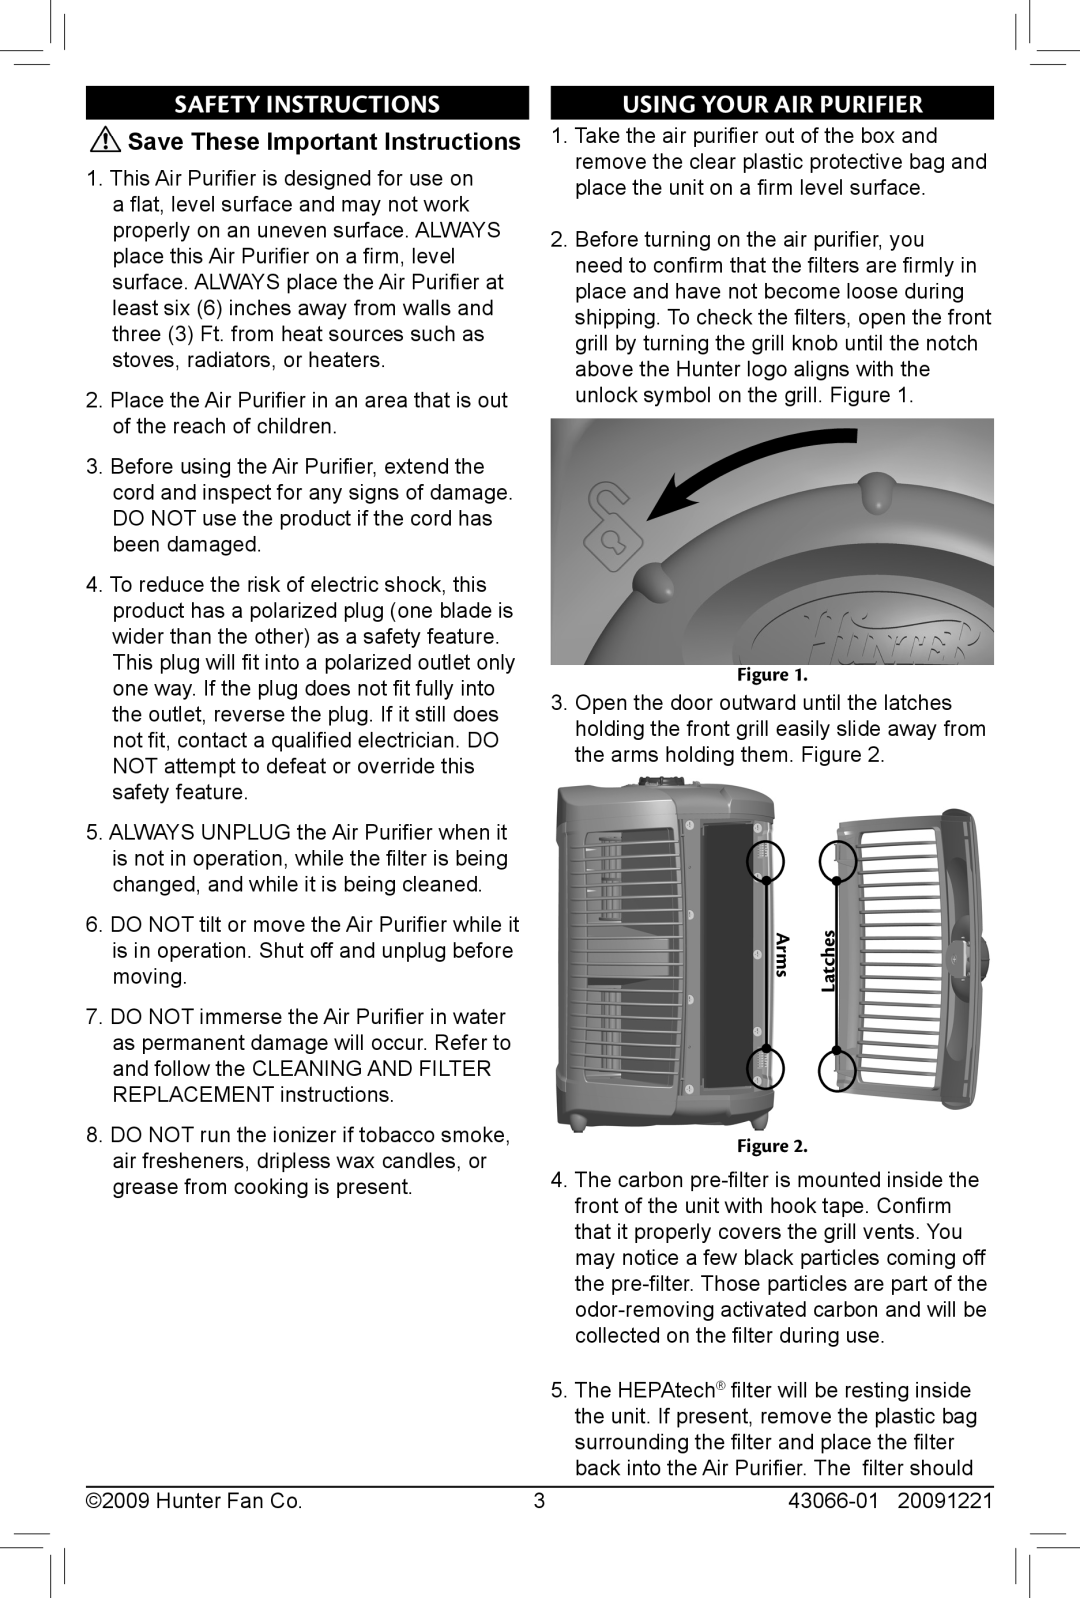 Hunter Fan 30701, 30700 owner manual Safety Instructions, Using Your Air Purifier, Save These Important Instructions 